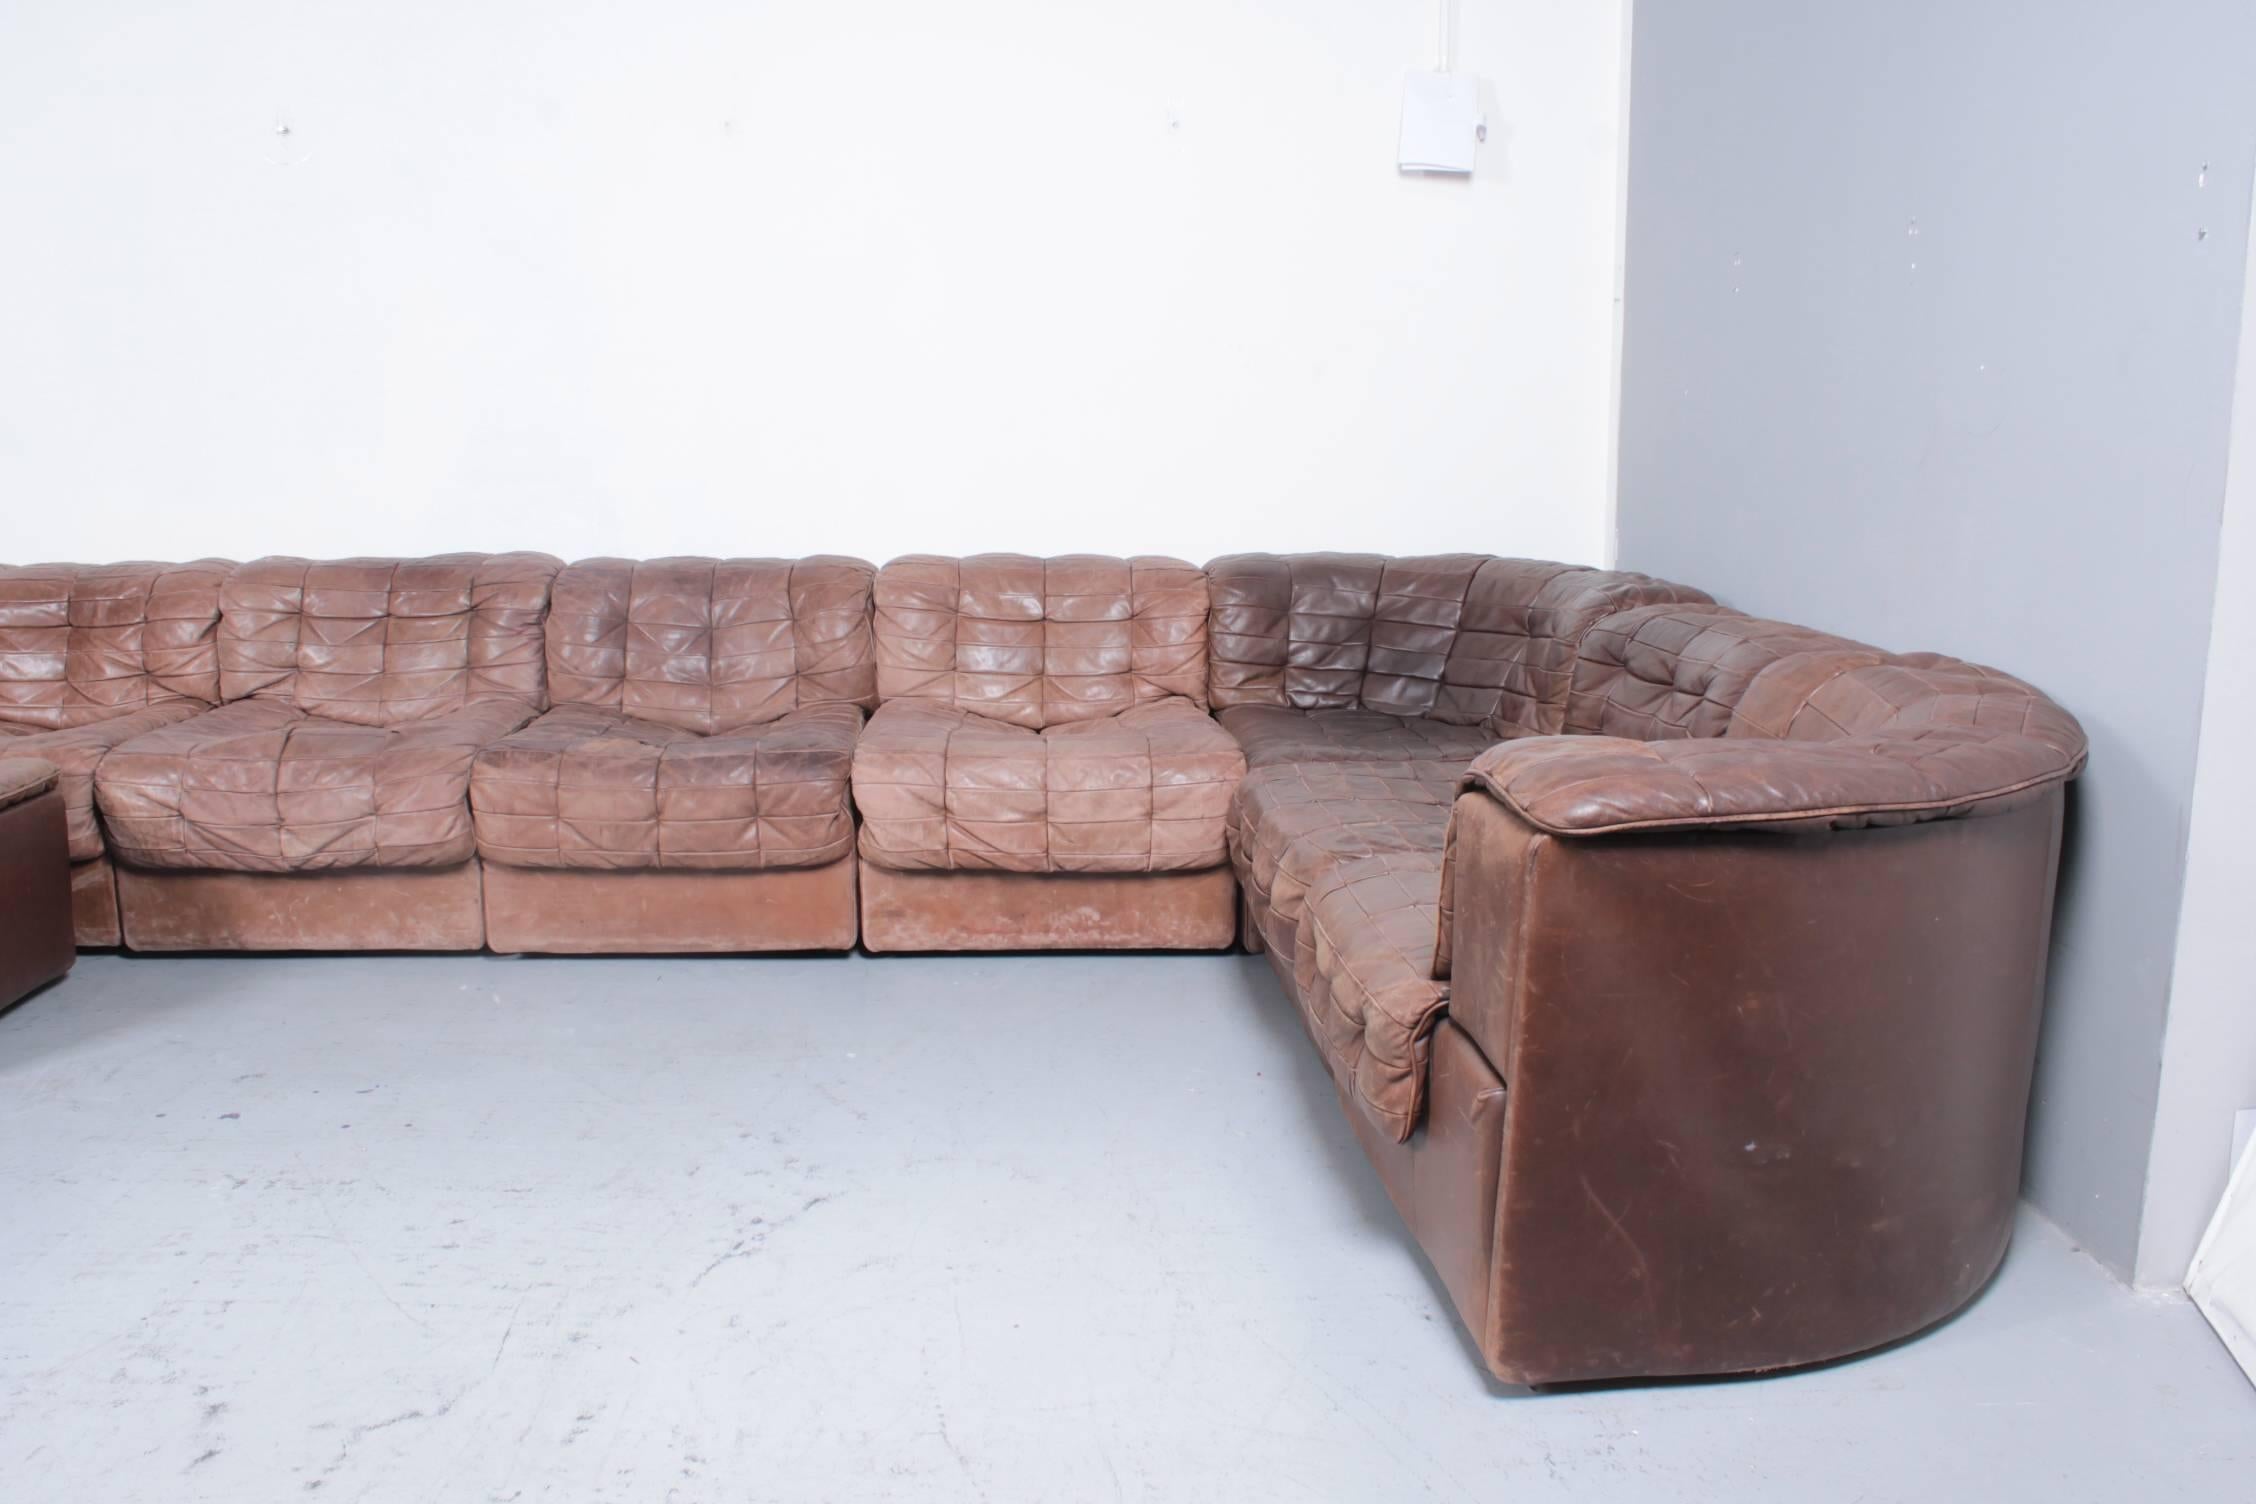 Big seating corner from Swiss manufacturer De Sede model DS11 in original brown patchwork leather. The set consists of ten pieces: one corner, two corner-ends, one ottoman and 6 straight parts. The set is original but can also be treated again with